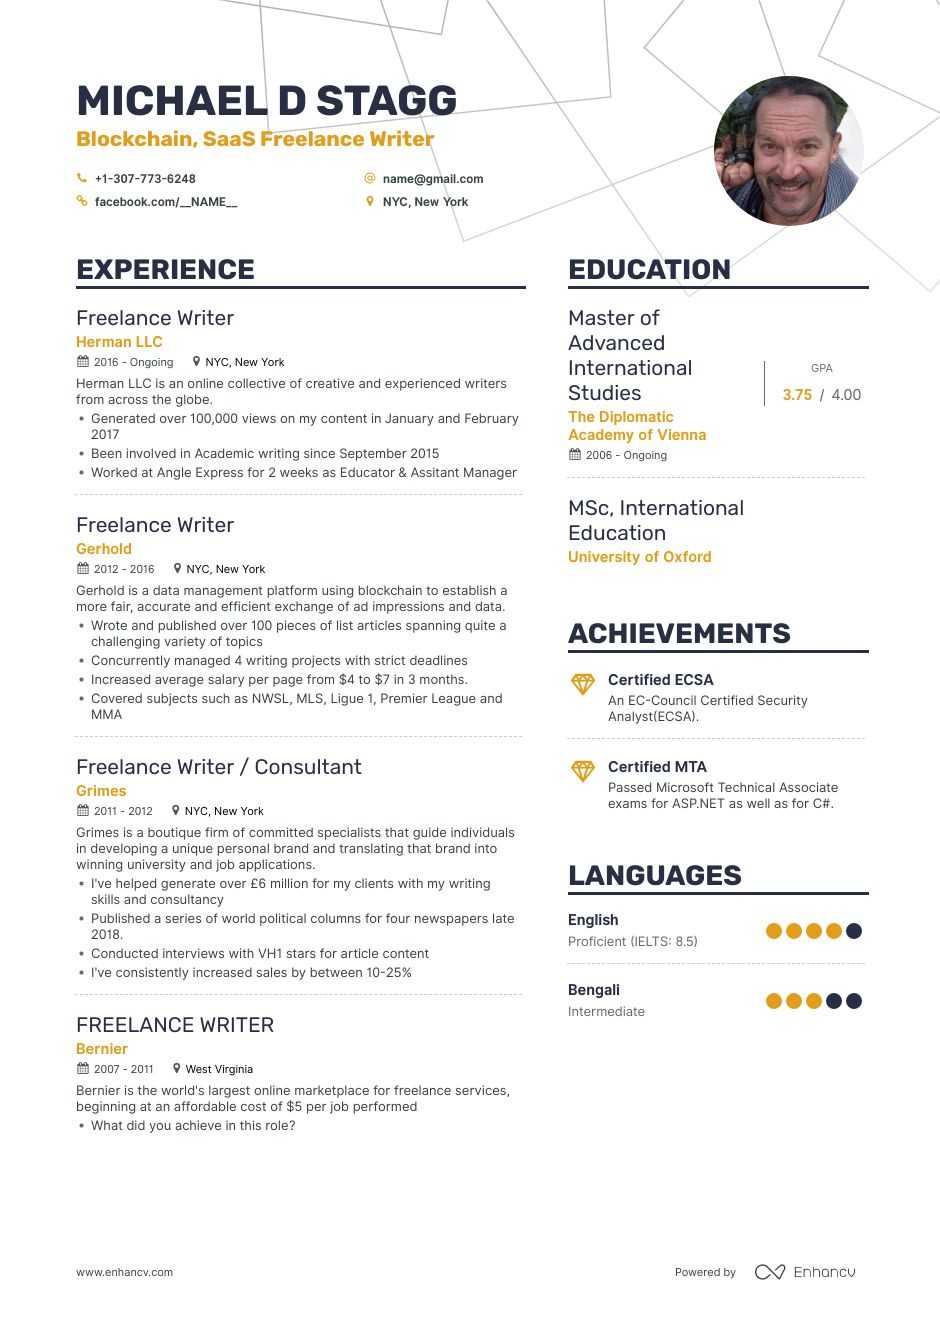 Freelance Writer Resume Examples and Skills You Need to ...